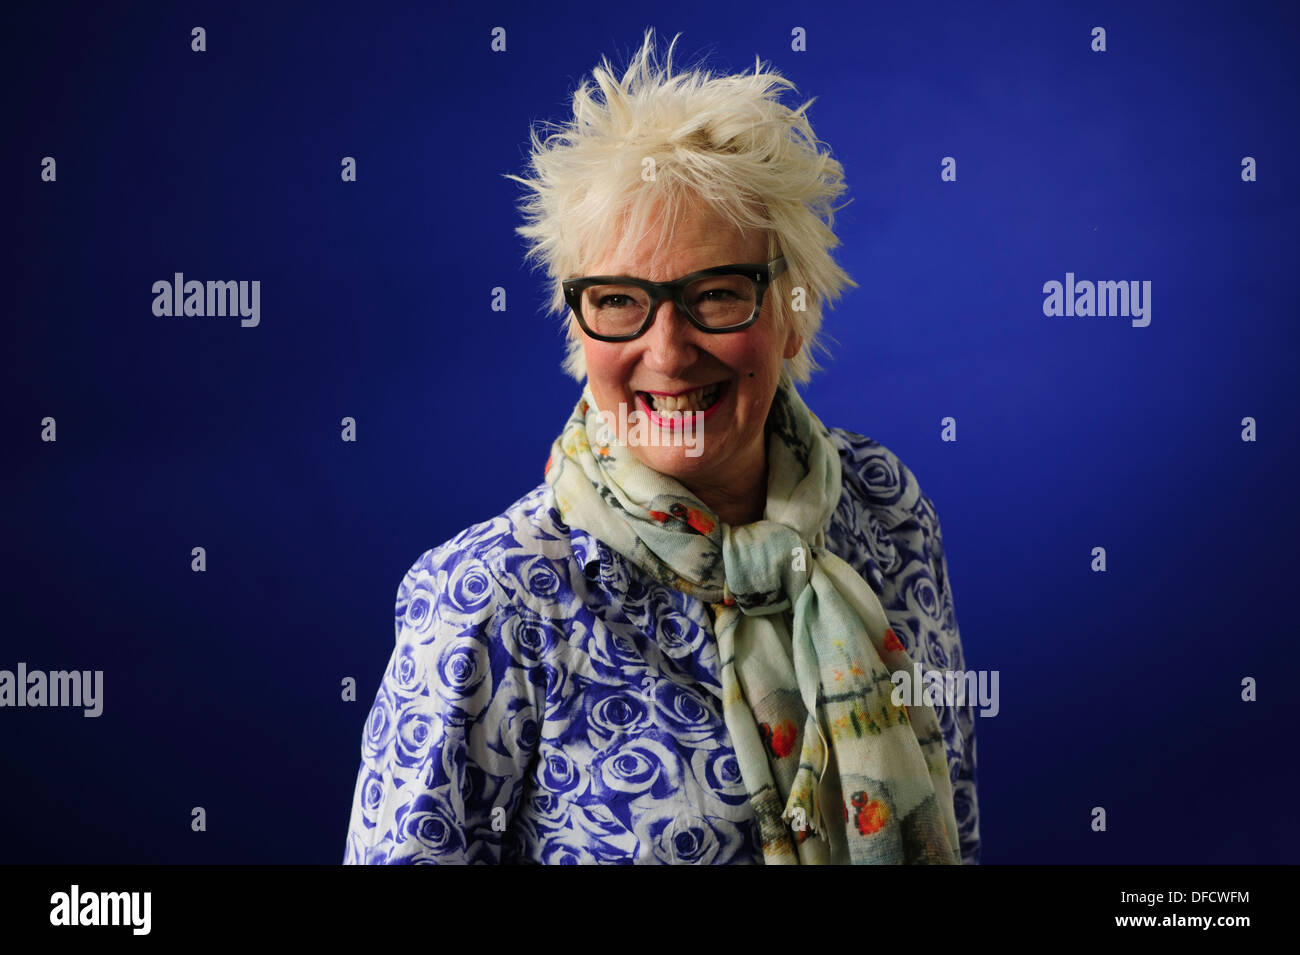 Jenny Eclair, English comedienne, novelist and actor, attending the Edinburgh International Book Festival 2013. Stock Photo